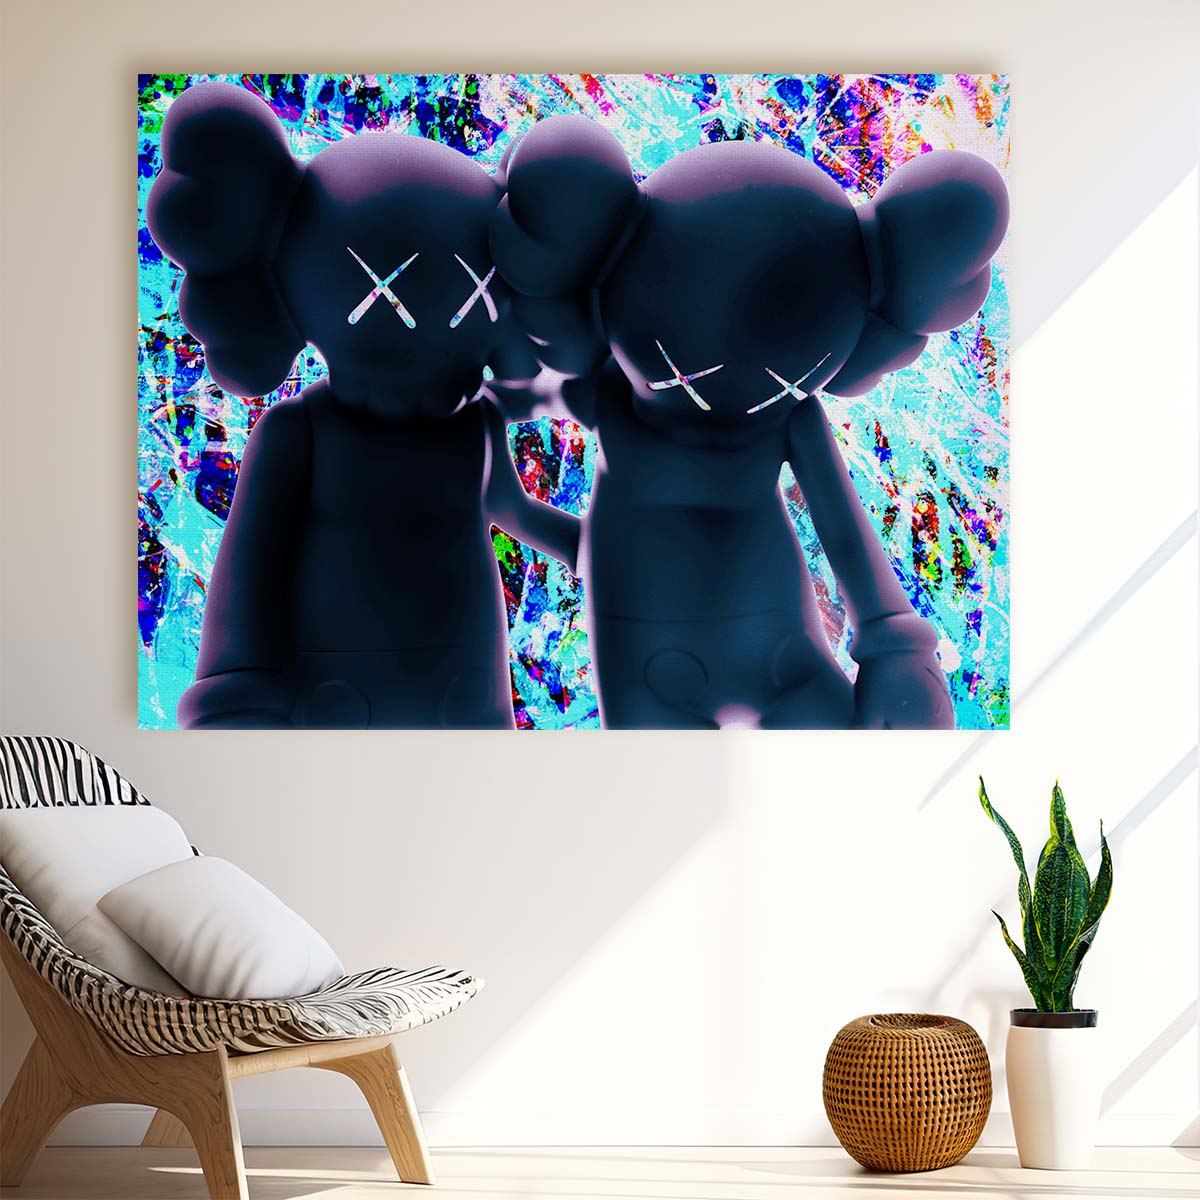 Two Kaws Figures Silhouette Hypebeast Wall Art by Luxuriance Designs. Made in USA.